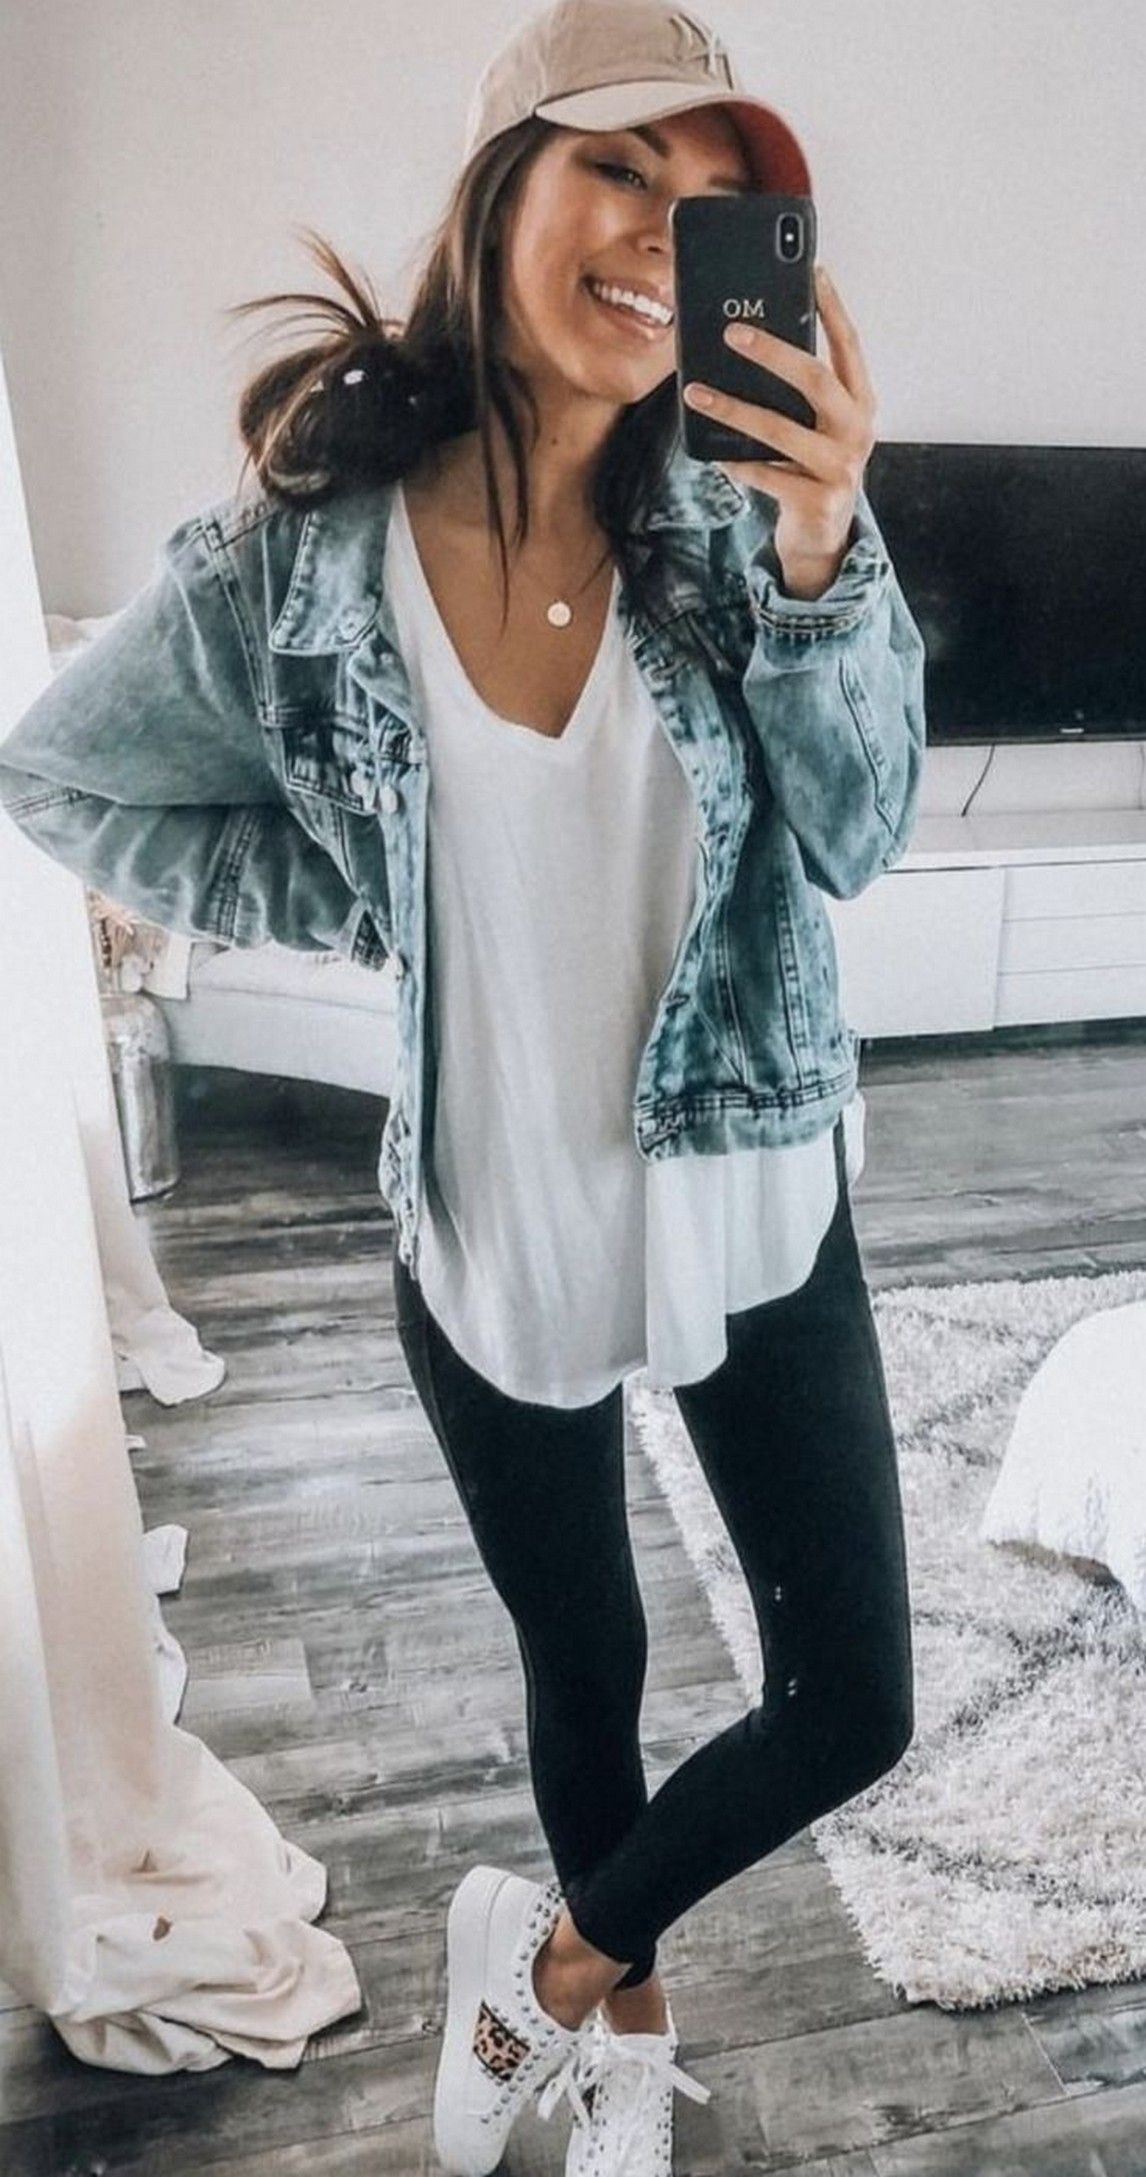 34 Women's White Sneakers Outfit Ideas for Spring | Spring Outfits | Cute Casual Outfits - 34 Women's White Sneakers Outfit Ideas for Spring | Spring Outfits | Cute Casual Outfits -   13 casual style Autumn ideas